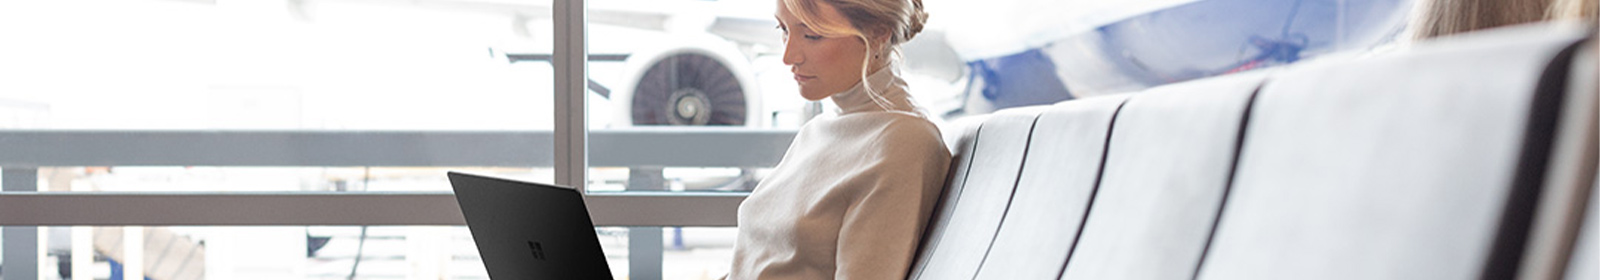 The photo shows a woman sitting with the laptop at the airport.